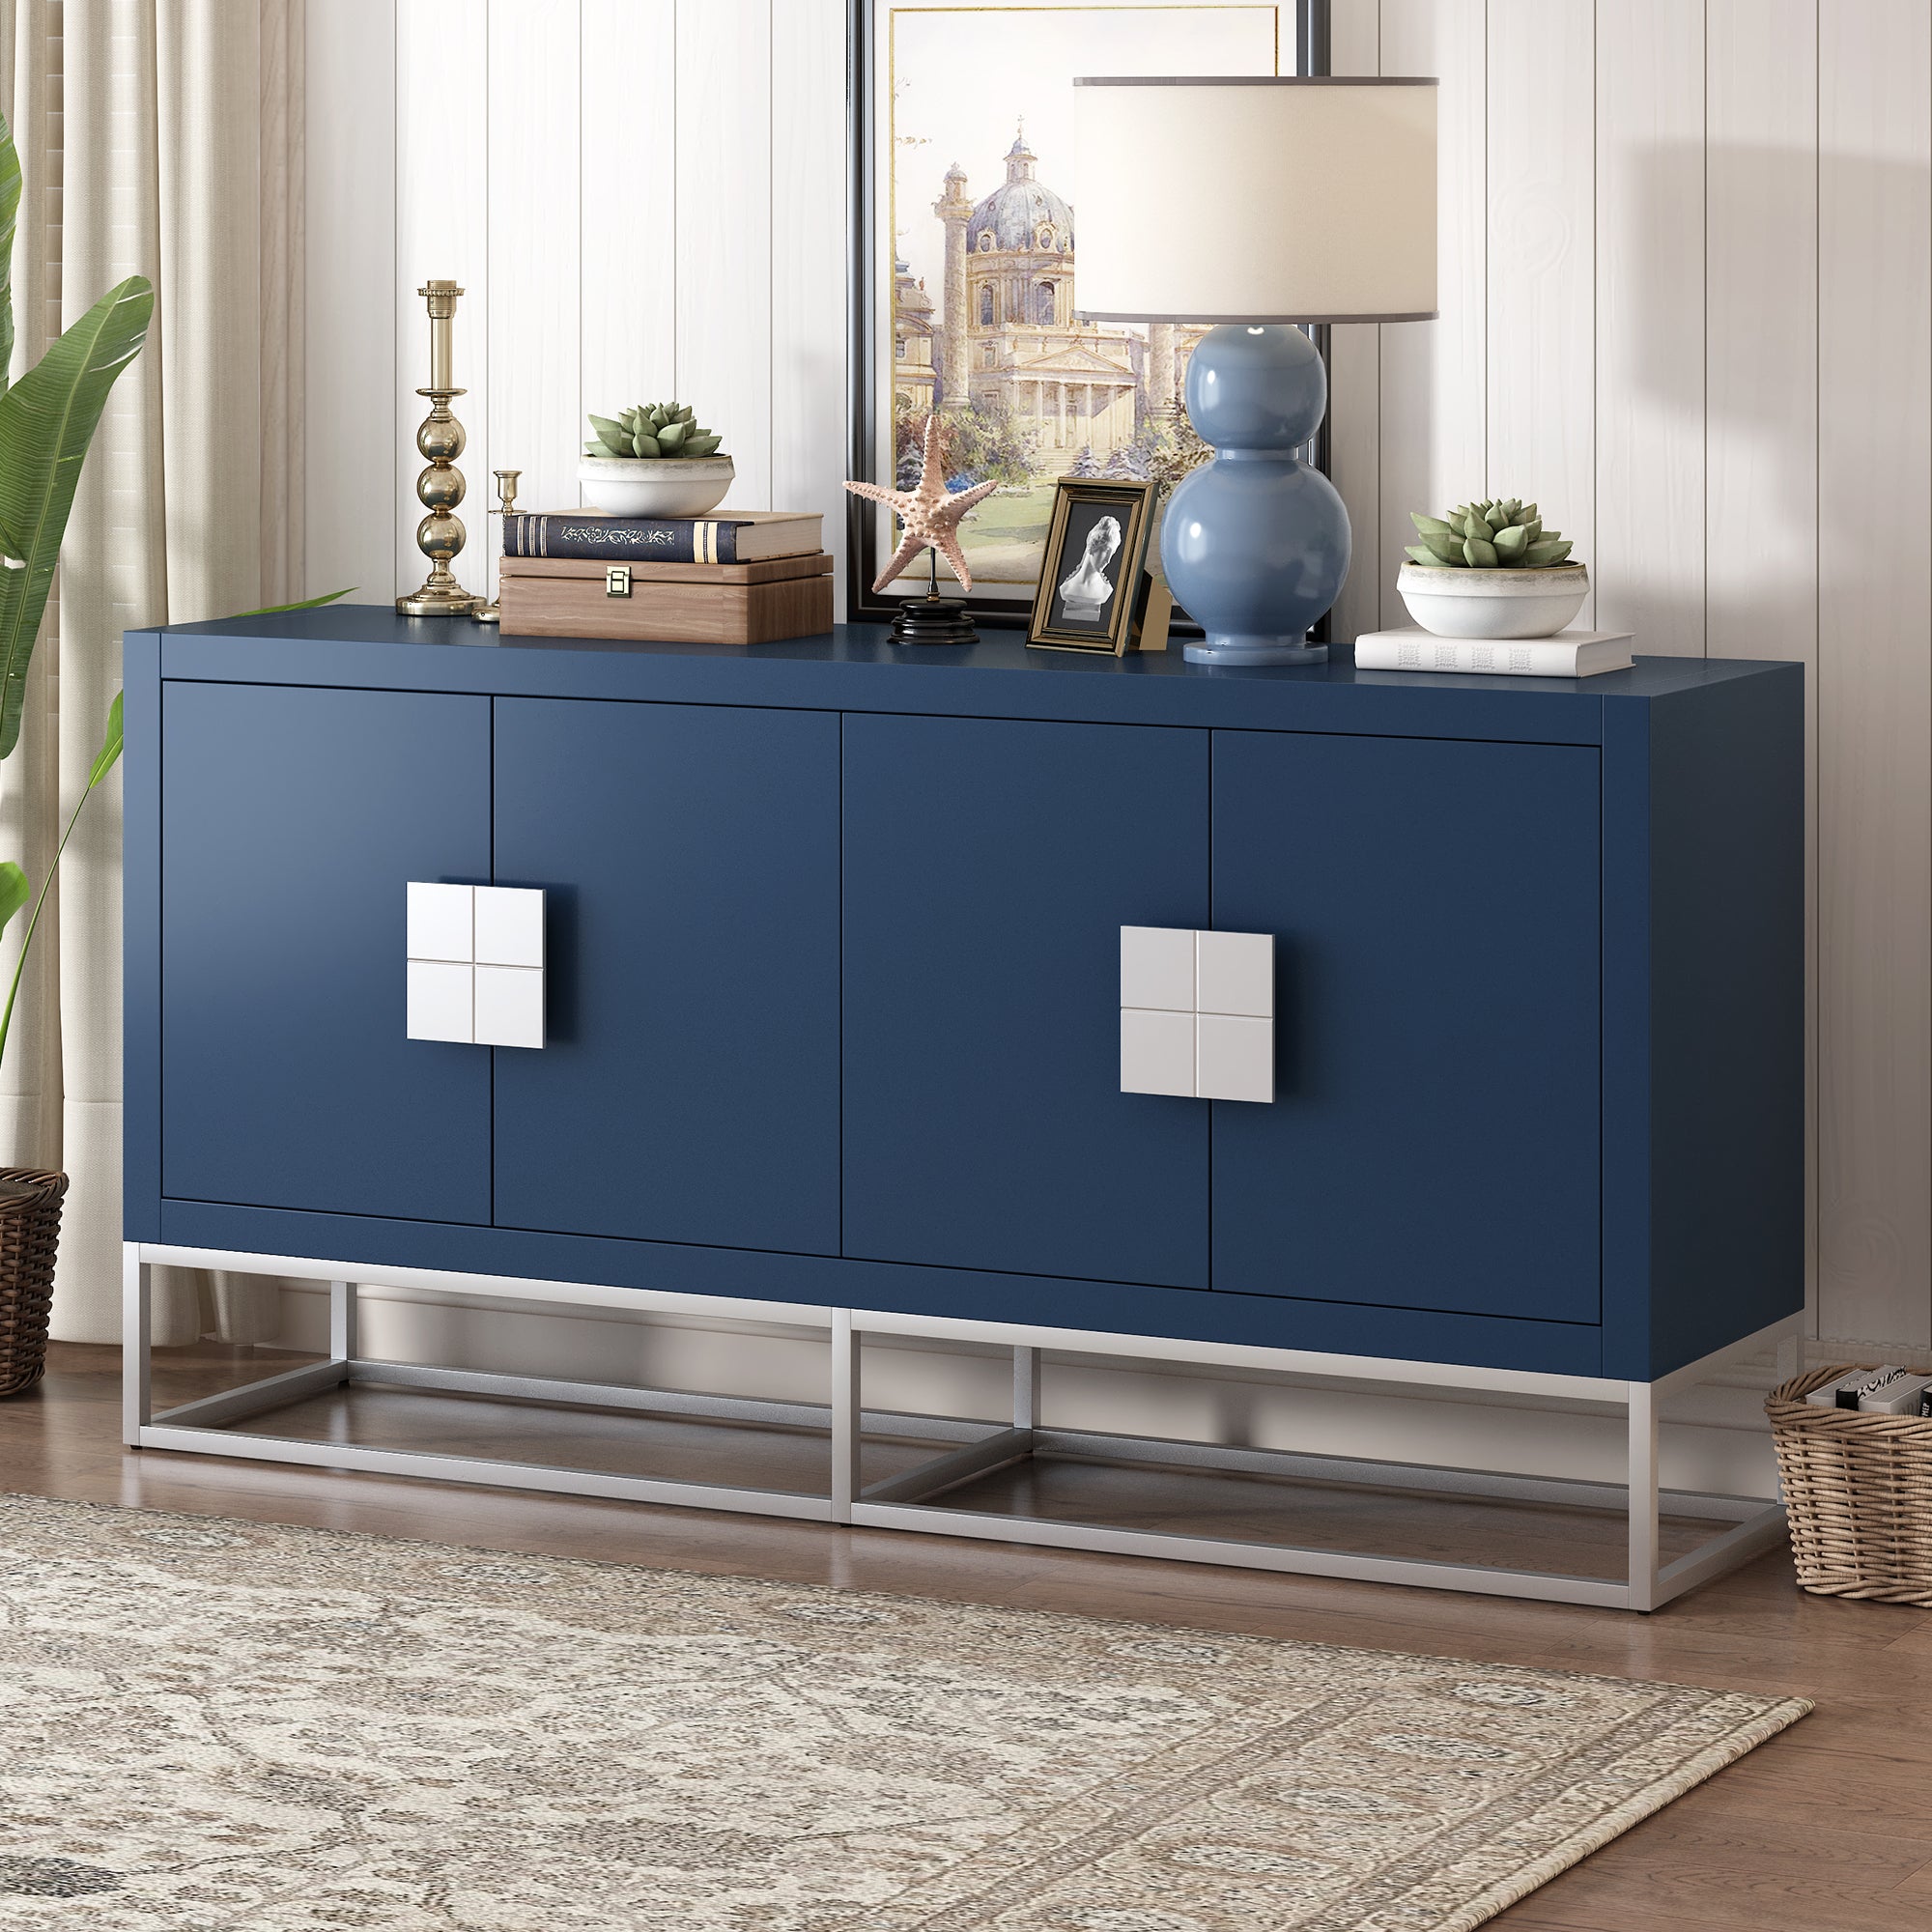 🆓🚛 Light Luxury Designed Cabinet With Unique Support Legs and Adjustable Shelves, Suitable for Living Rooms, Corridors, and Study Rooms.